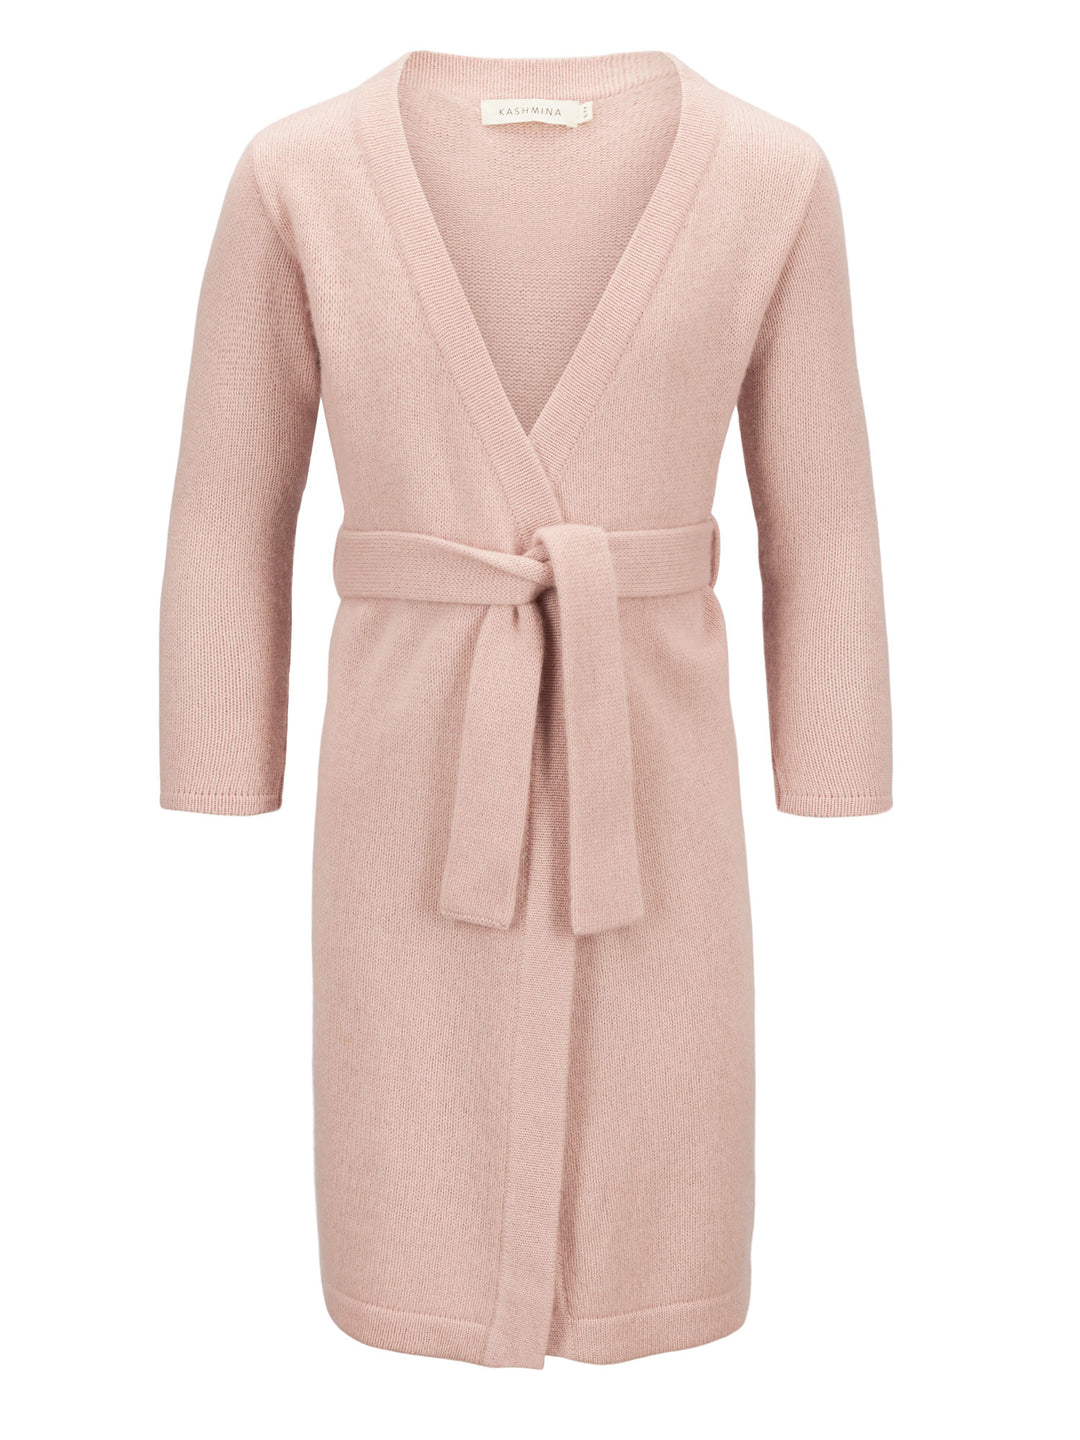 Cashmere robe for kids - rose glow